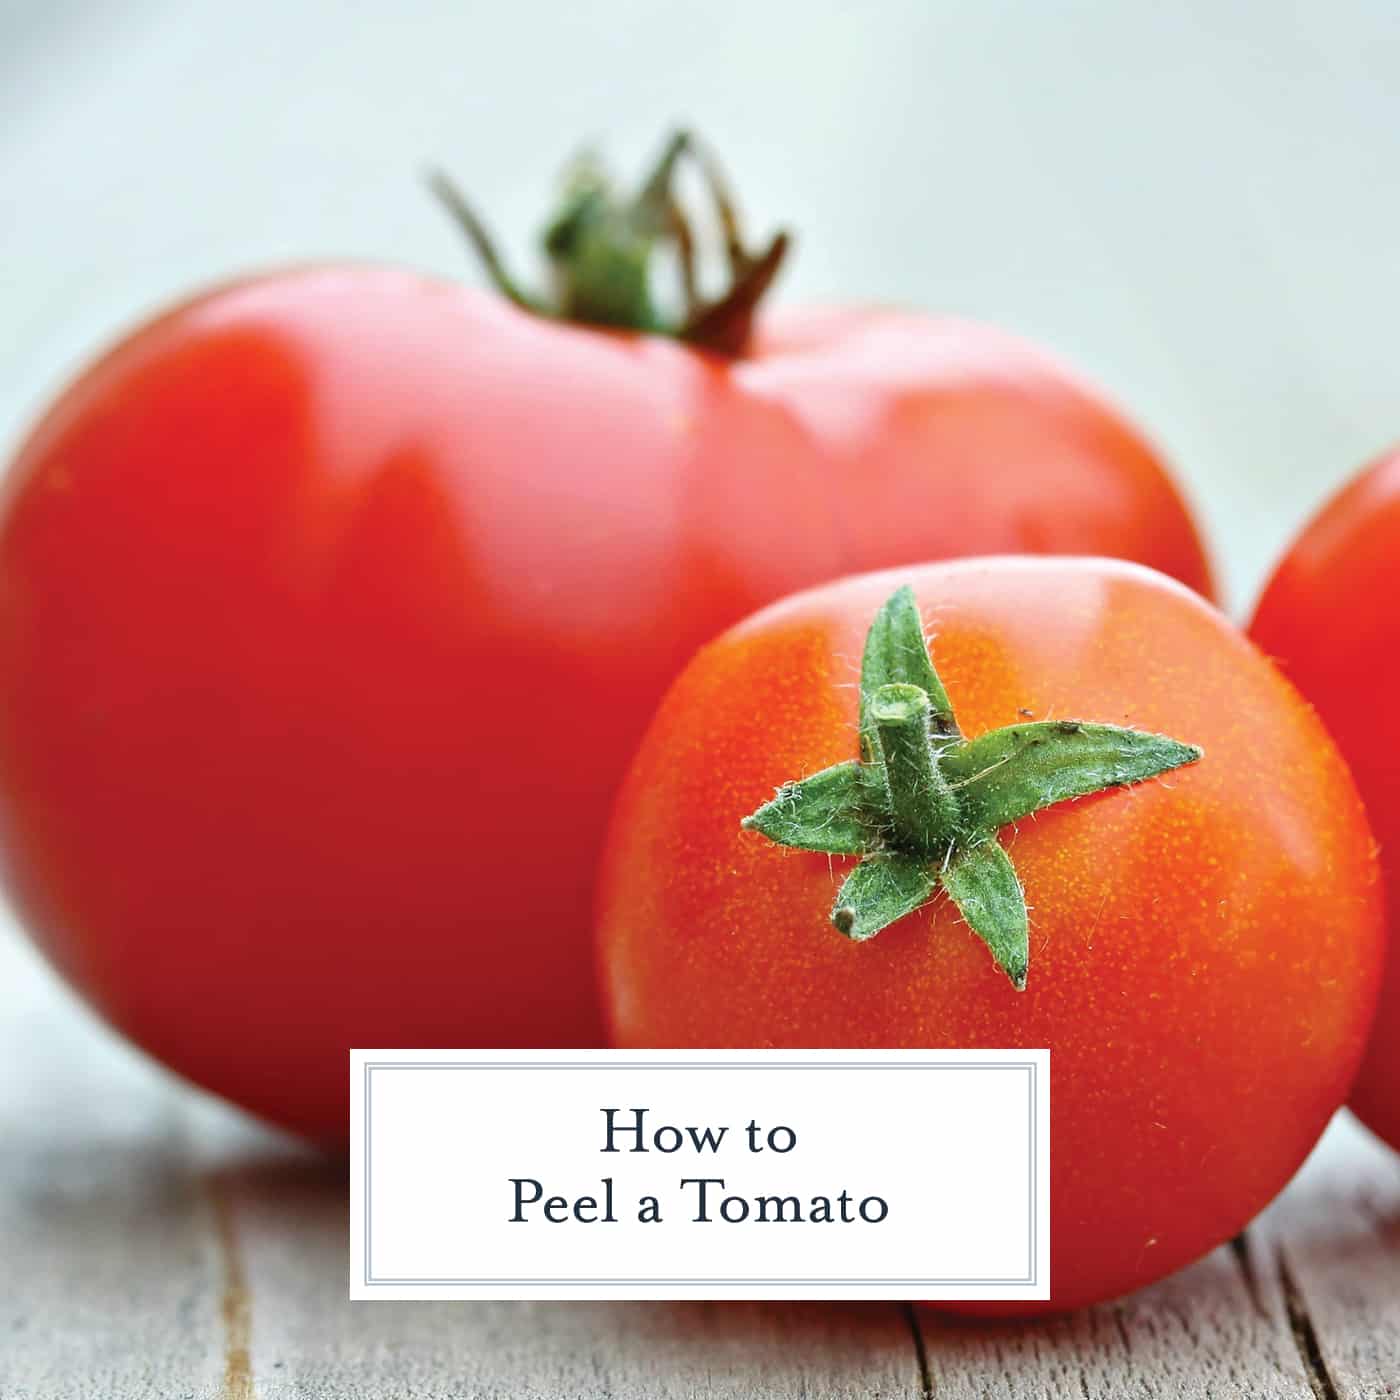 Learn how to peel a tomato in just a minute! Super easy without cooking the tomato. Perfect for sauces, salads and salsas! #howtopeelatomato #tomatoes www.savoryexperiments.com 